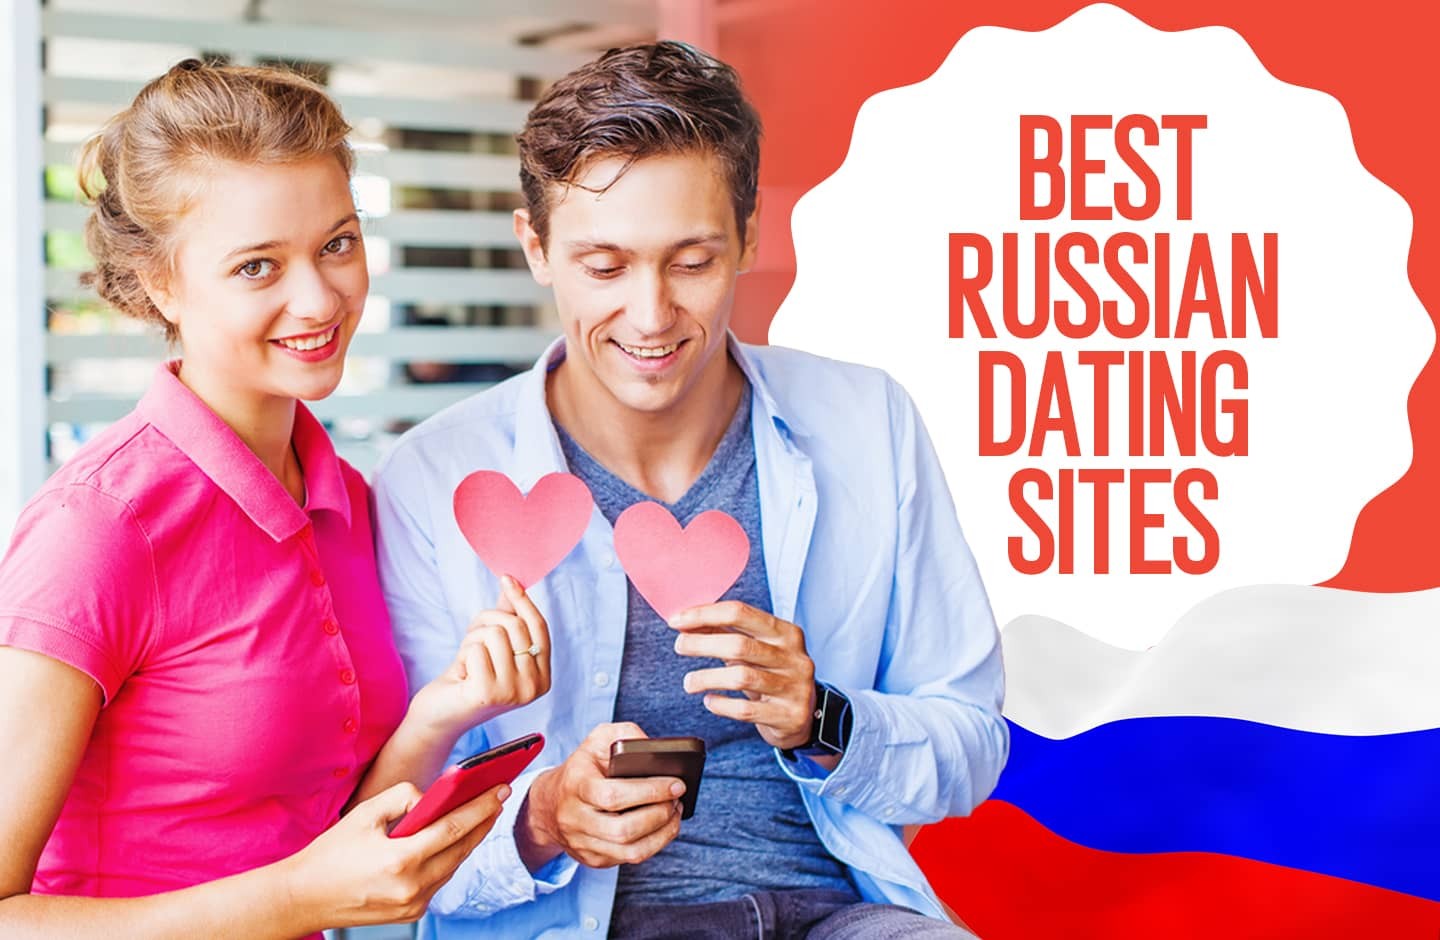 10 Free European Dating Sites & Apps: Best Dating Sites in Europe for Singles